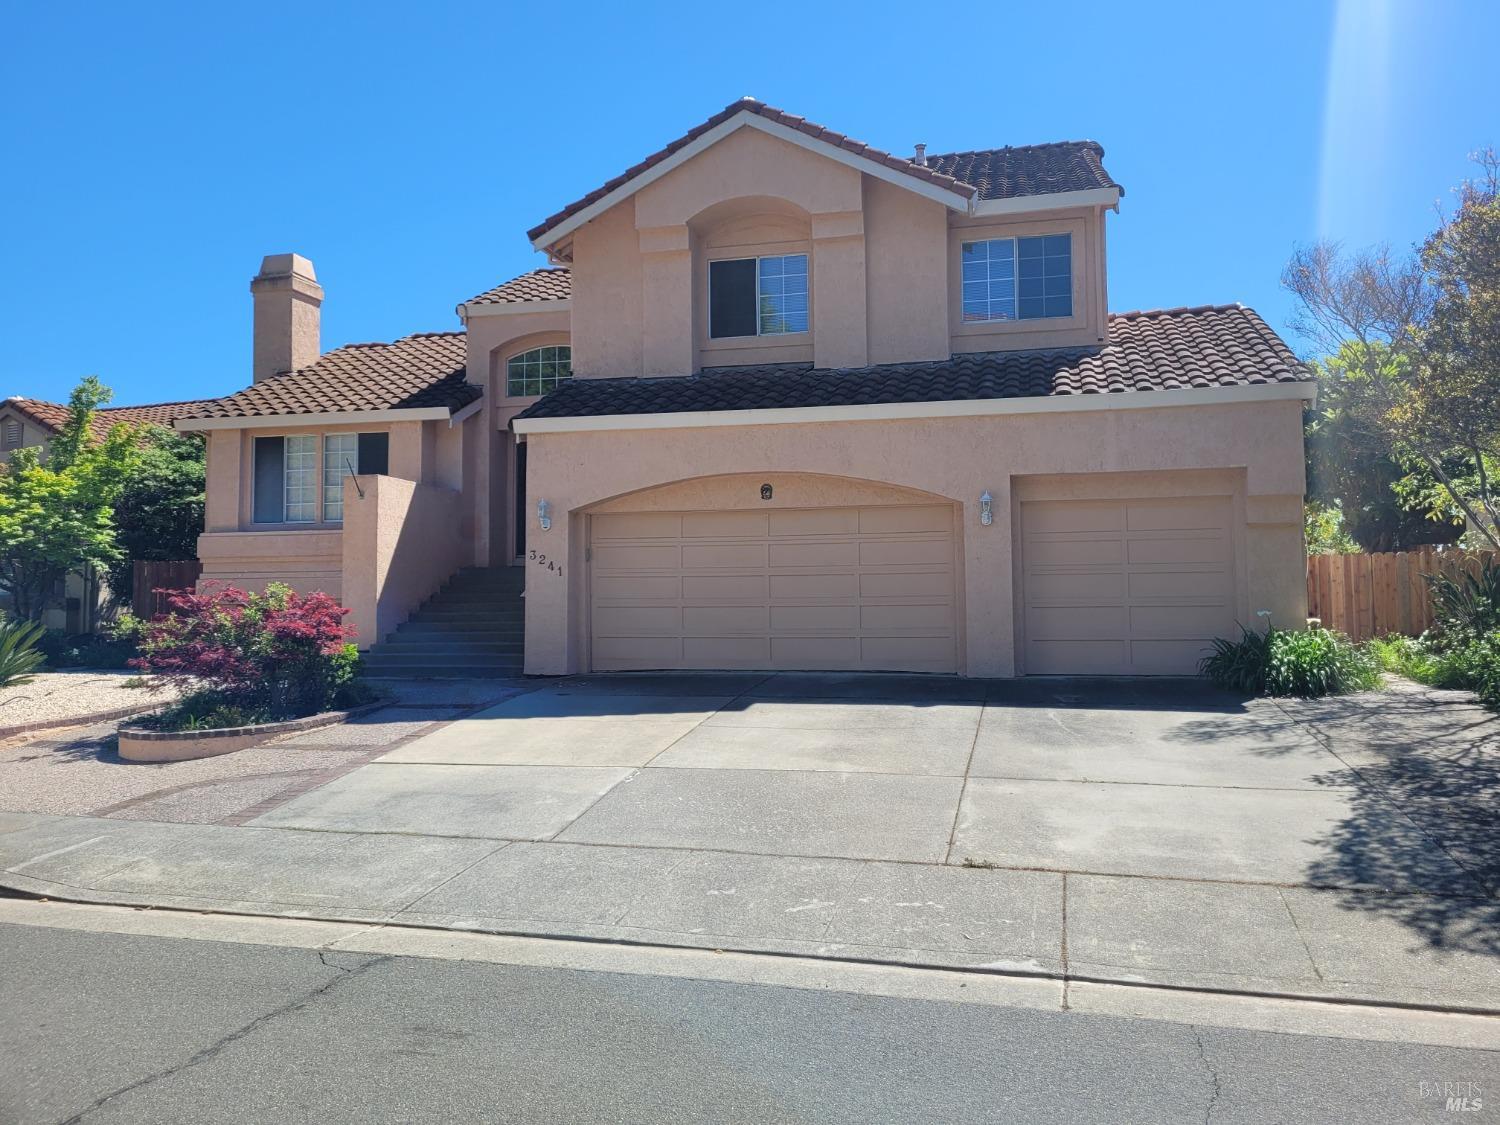 Photo of 3241 Winged Foot Dr in Fairfield, CA